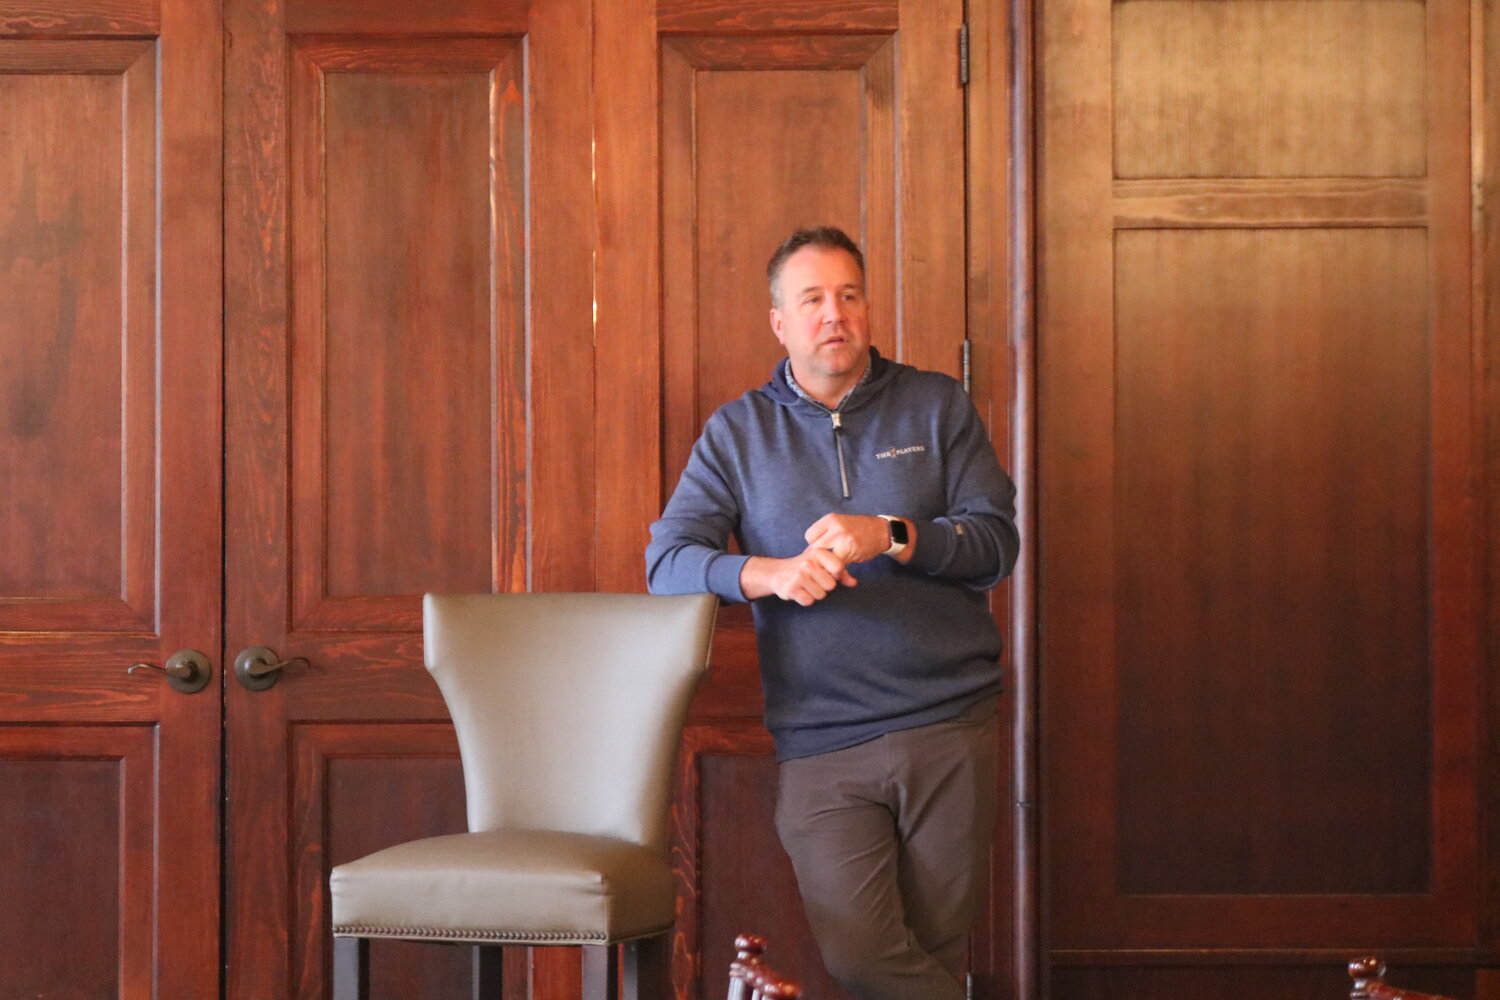 THE PLAYERS executive director Lee Smith speaks during media day at TPC Sawgrass on Feb. 5.